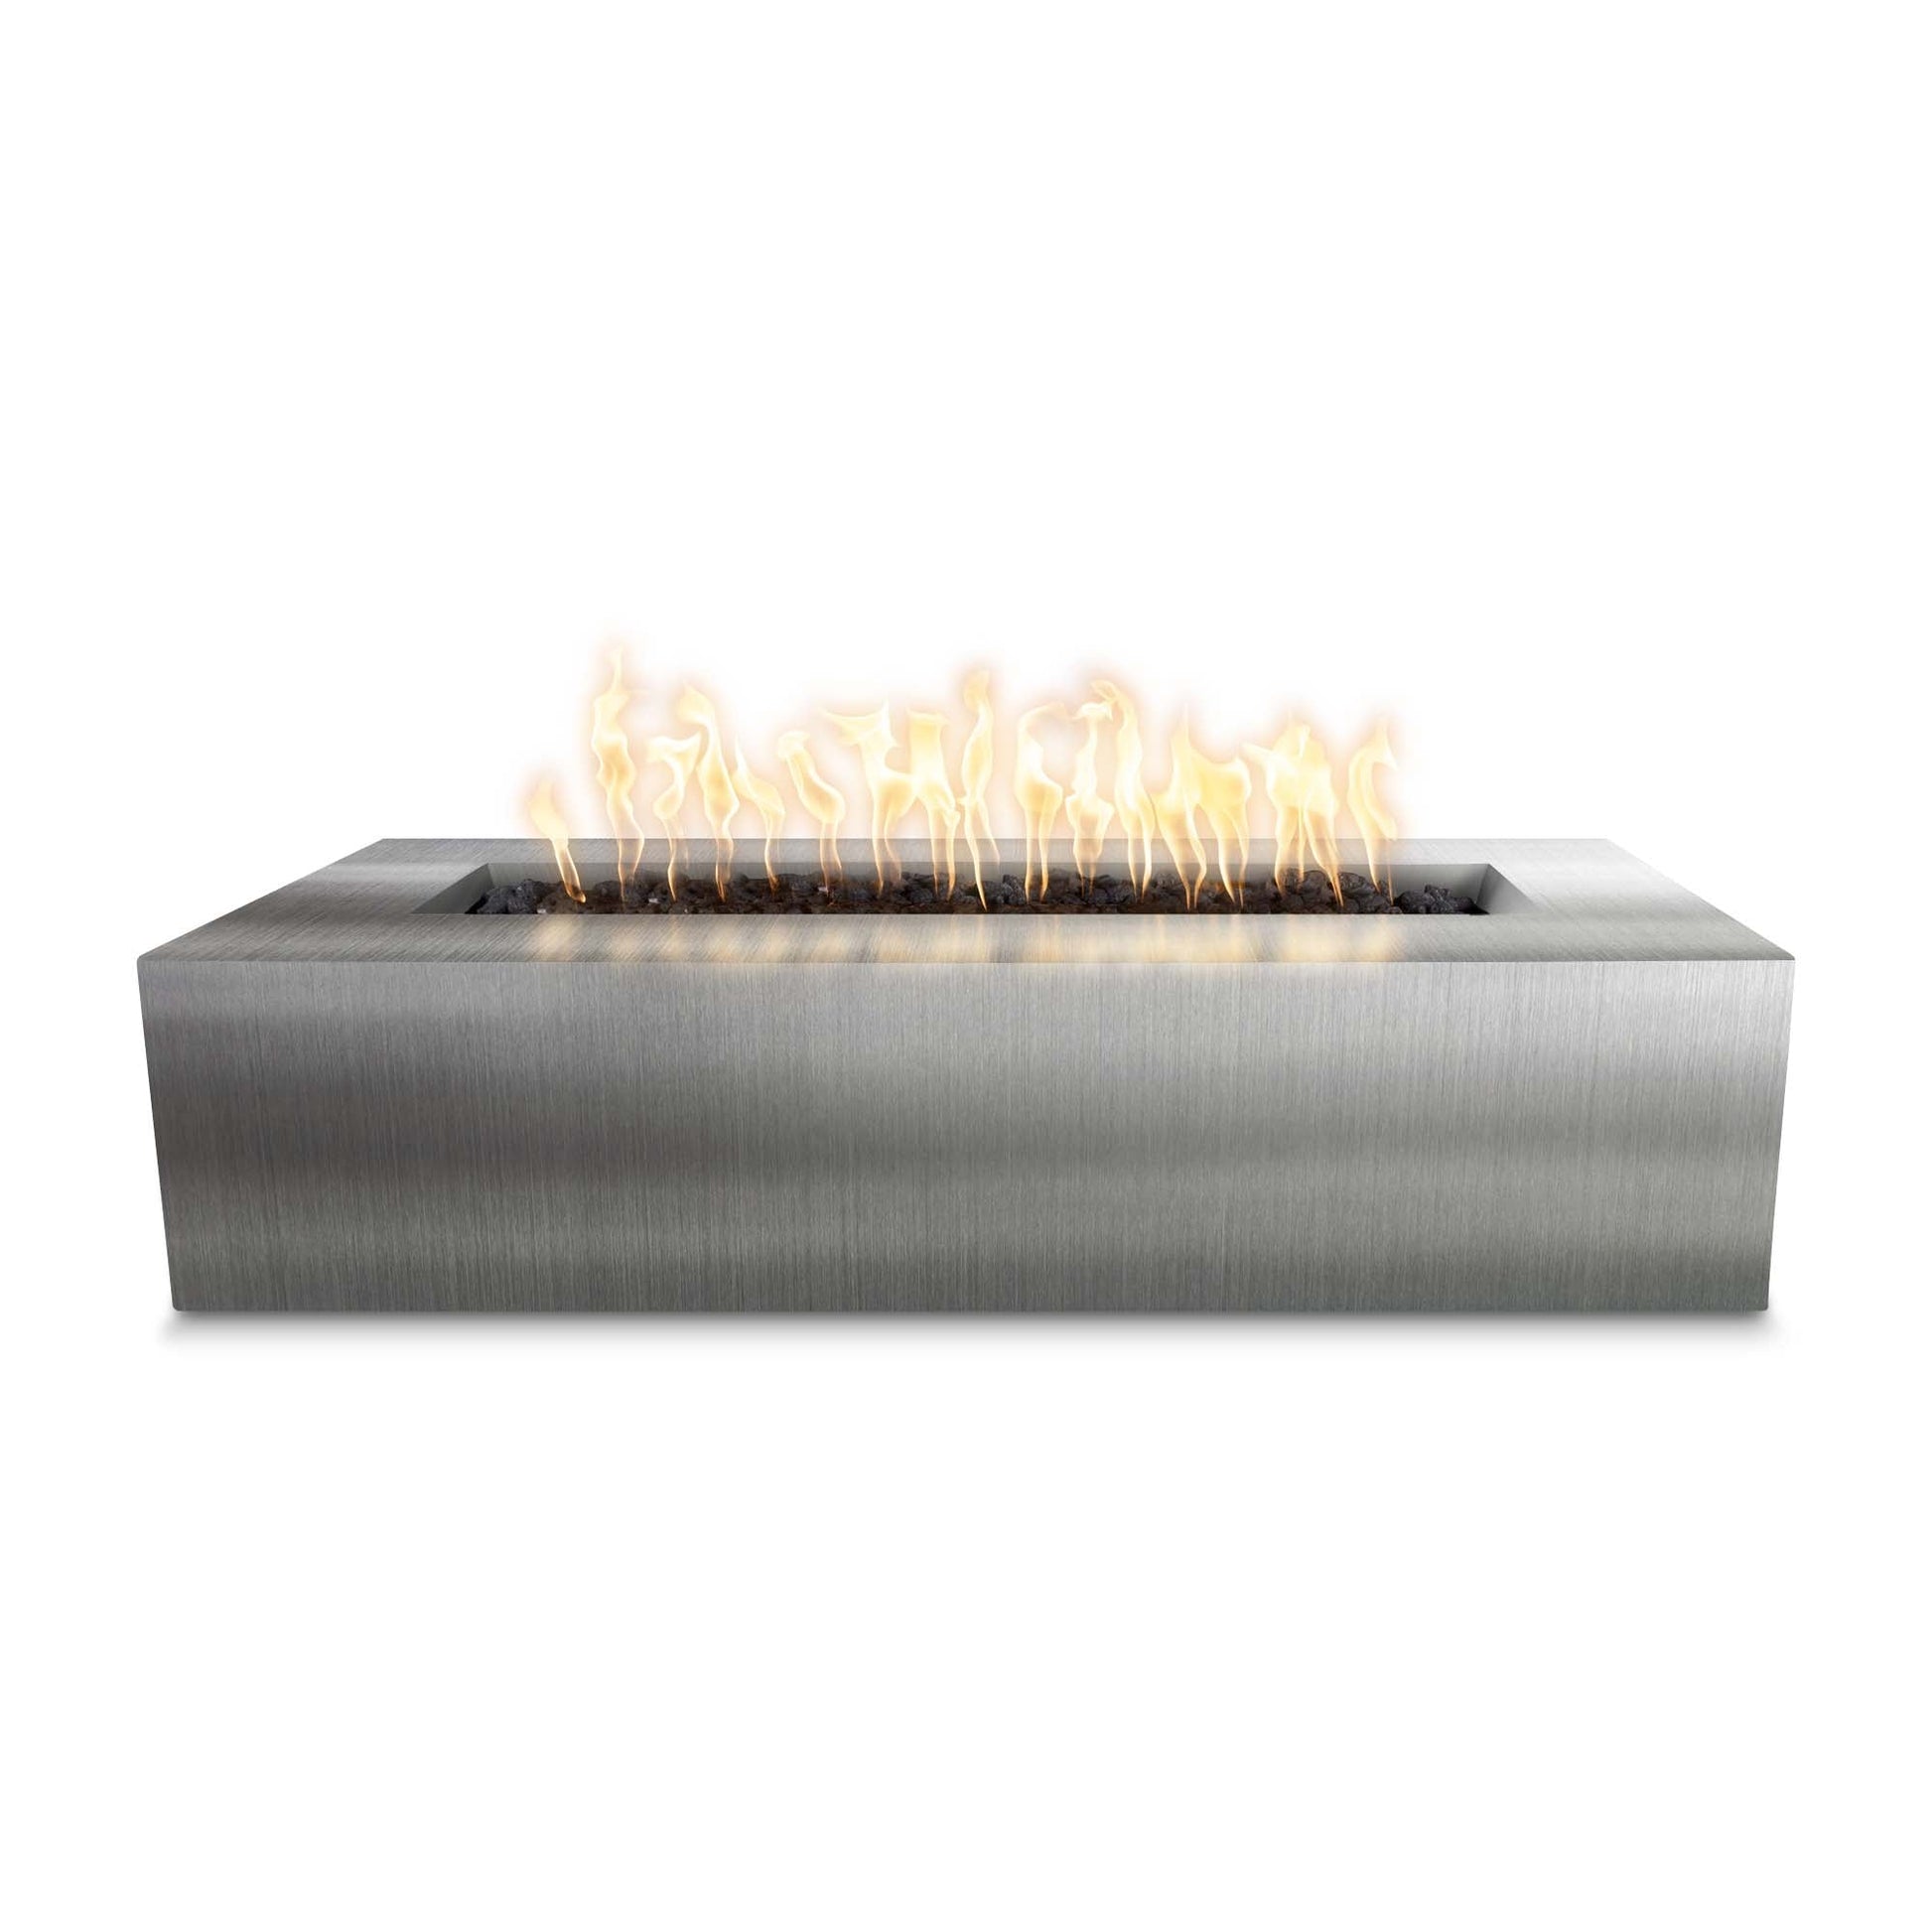 The Outdoor Plus Rectangular Regal 54" Hammered Copper Liquid Propane Fire Pit with Flame Sense with Spark Ignition